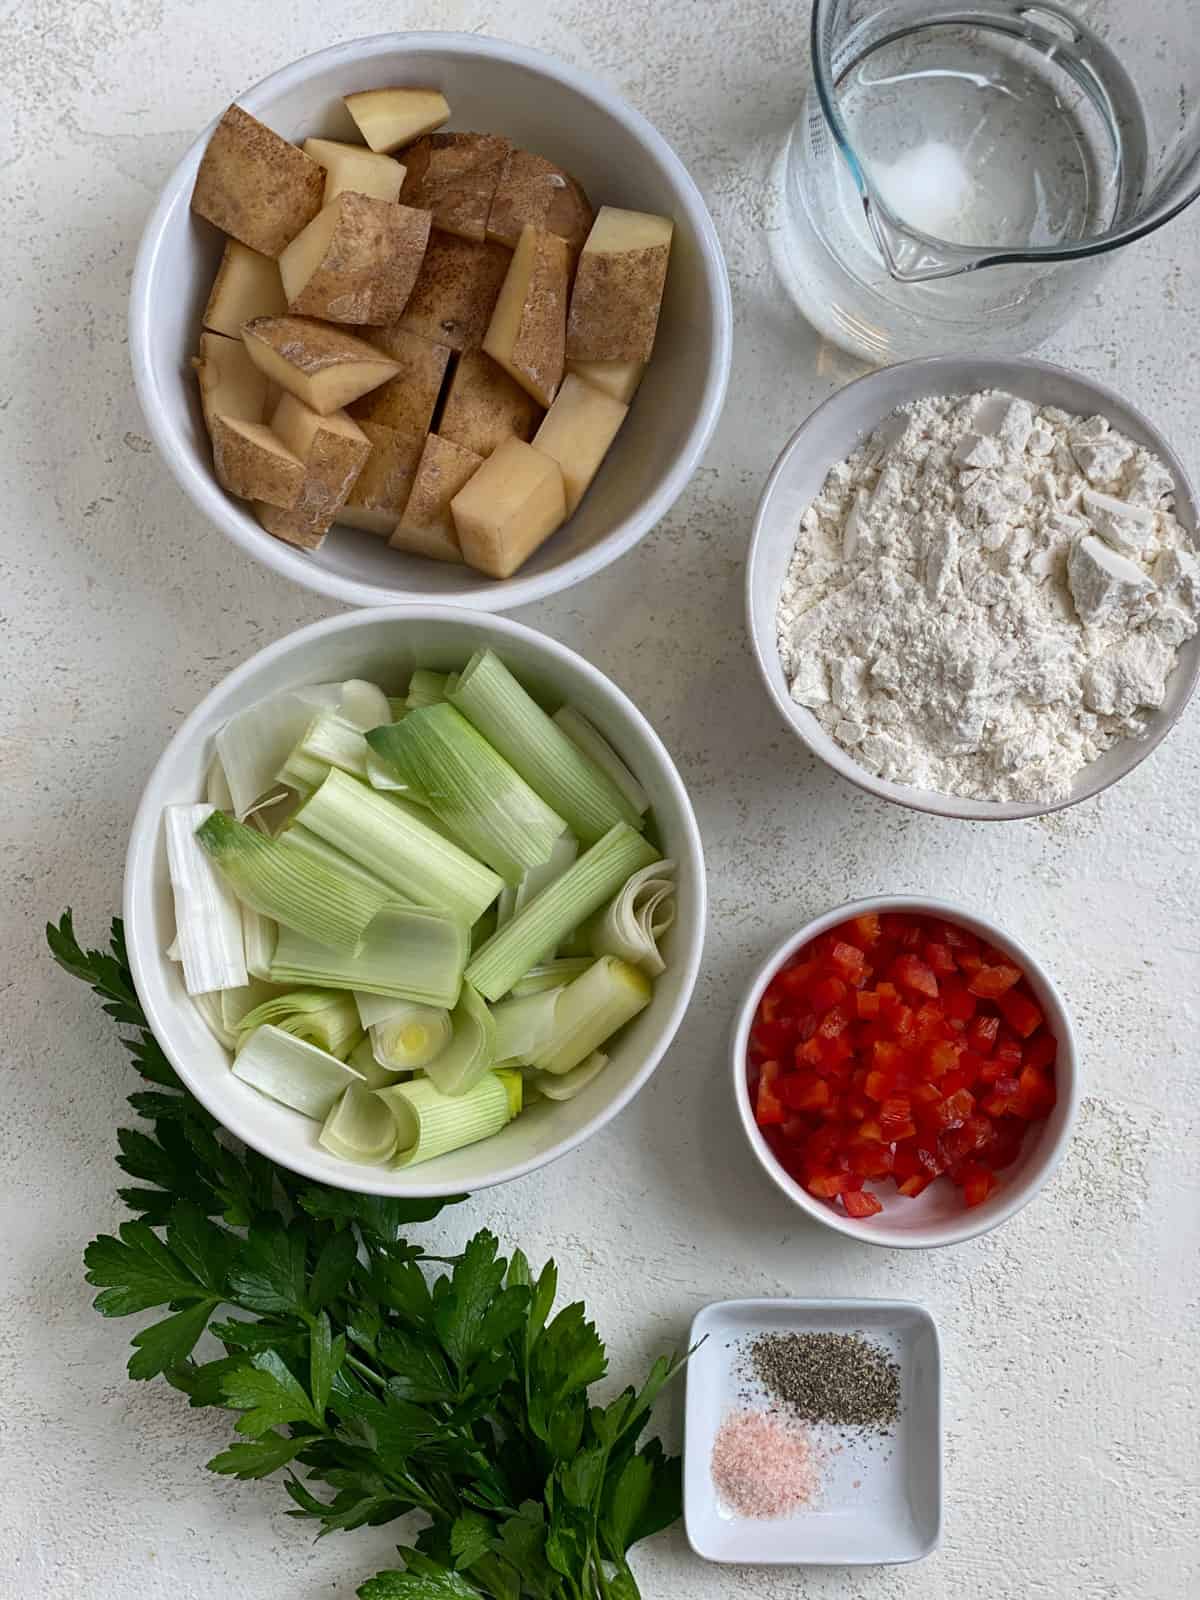 ingredients for Vegan Potato Pancakes measured out against a white background